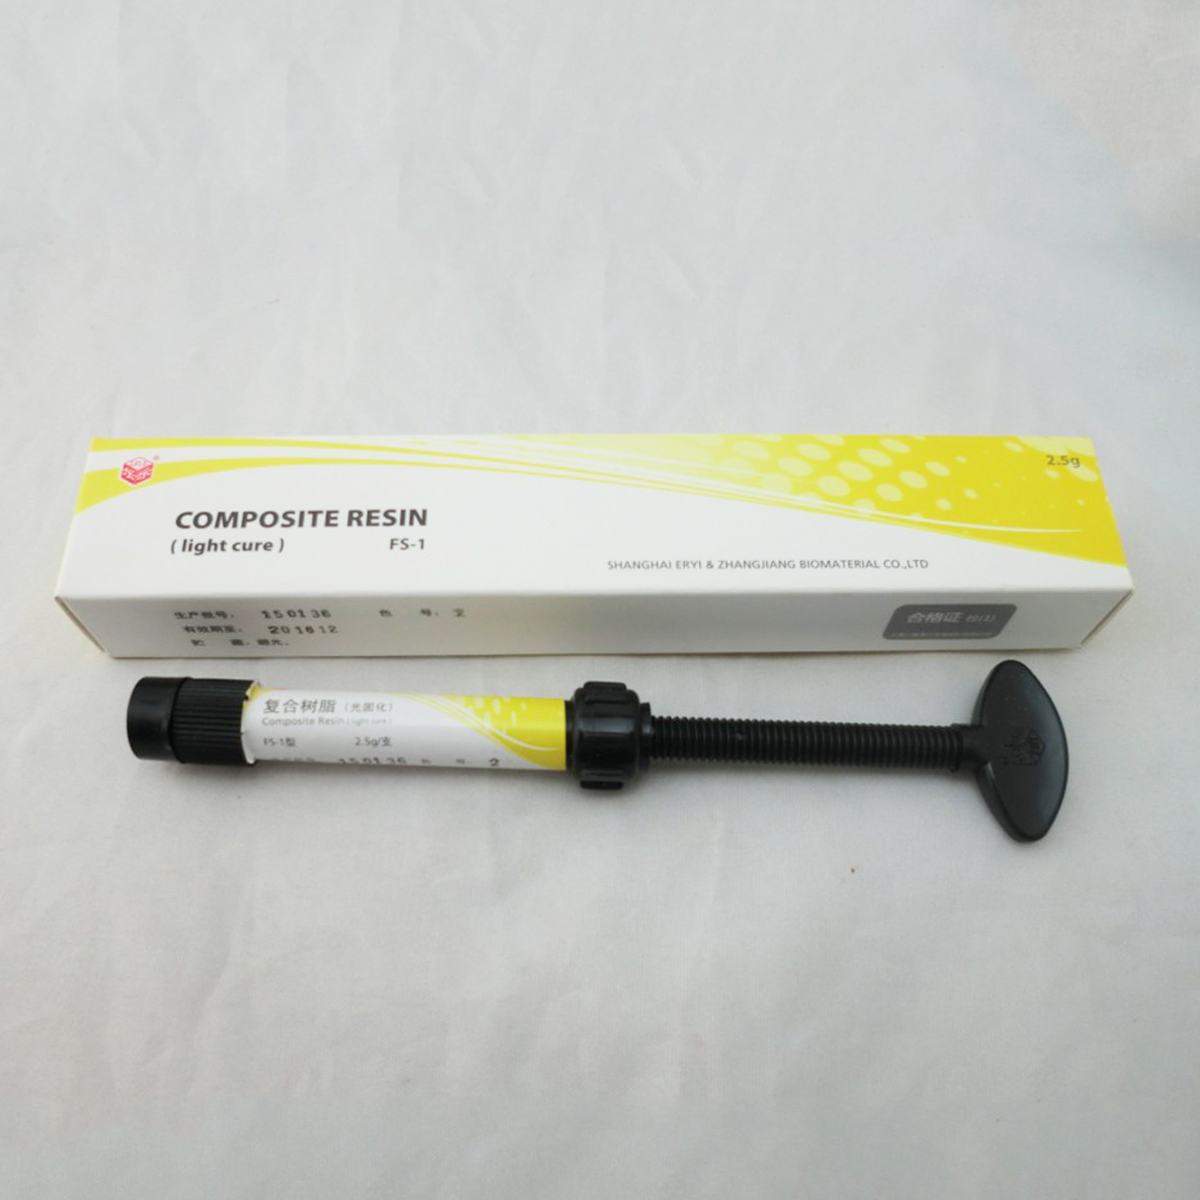 Dental-Temporary-Light-Cure-Tool-Material-Filling-Inlay-Composite-Resin-25g-1408812-1